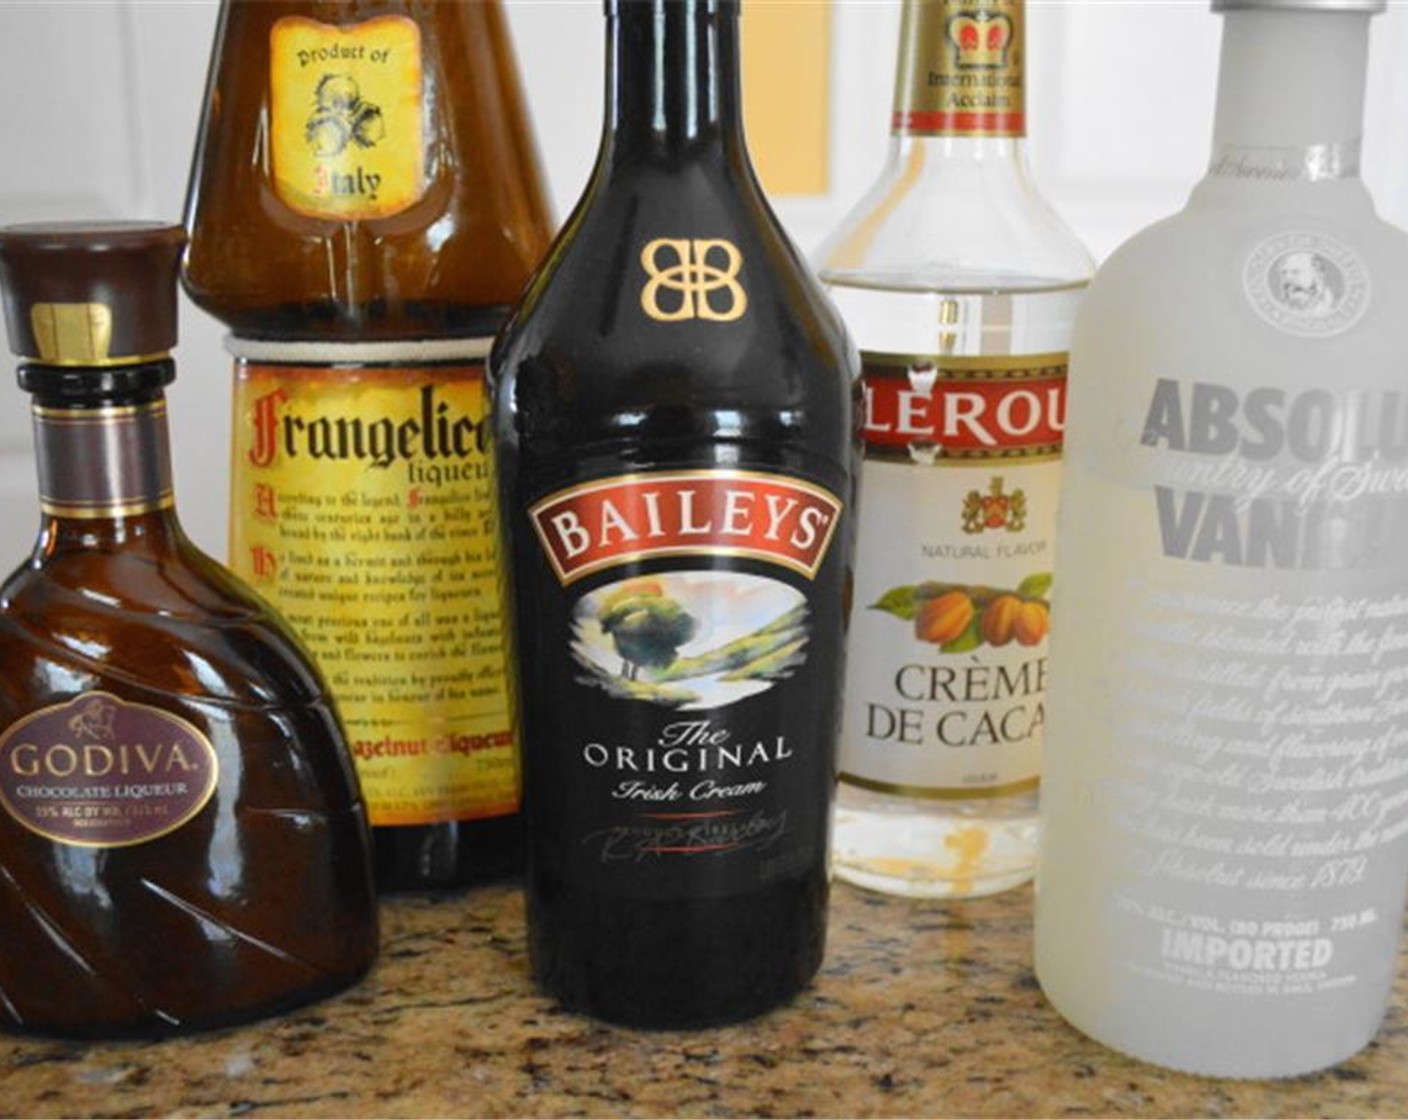 step 3 Pour ice into a drink shaker. Add Absolut® Vanilla Vodka (1/3 cup), Godiva® Chocolate Liqueur (1/4 cup), Chocolate Liqueur (2 Tbsp), Frangelico (2 Tbsp) and Bailey's® Irish Cream (2 Tbsp). Give it a good thorough shake to make sure it is well combined.